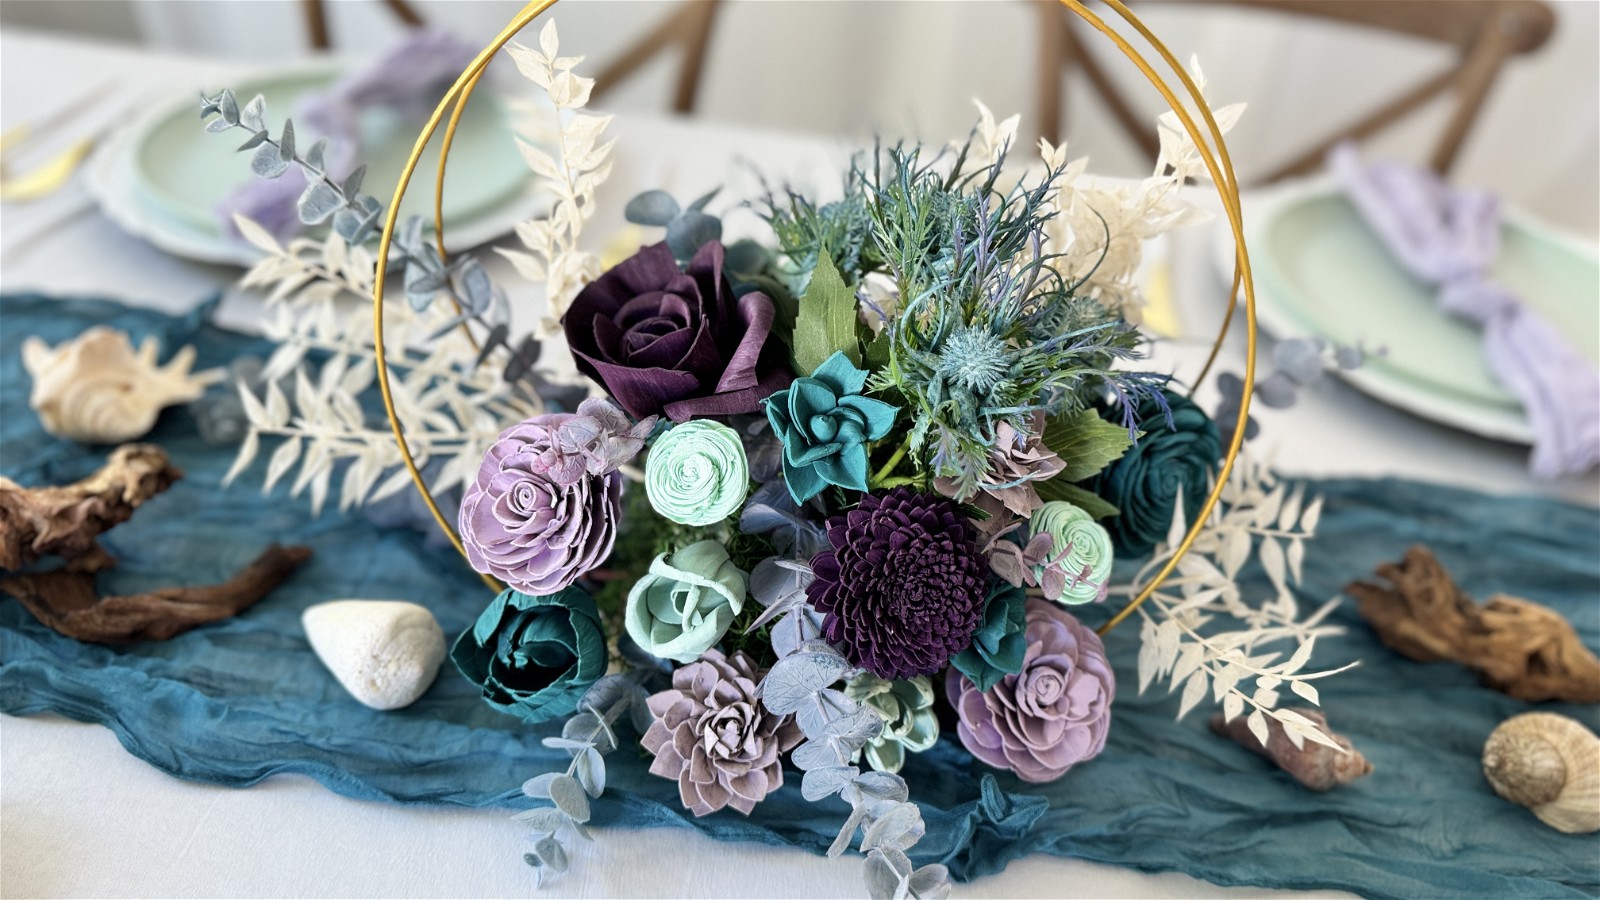 Image of Whimsical Floral Hoop Arrangement - DIY Wedding Centerpiece Step-by-Step Instructions and Tutorial